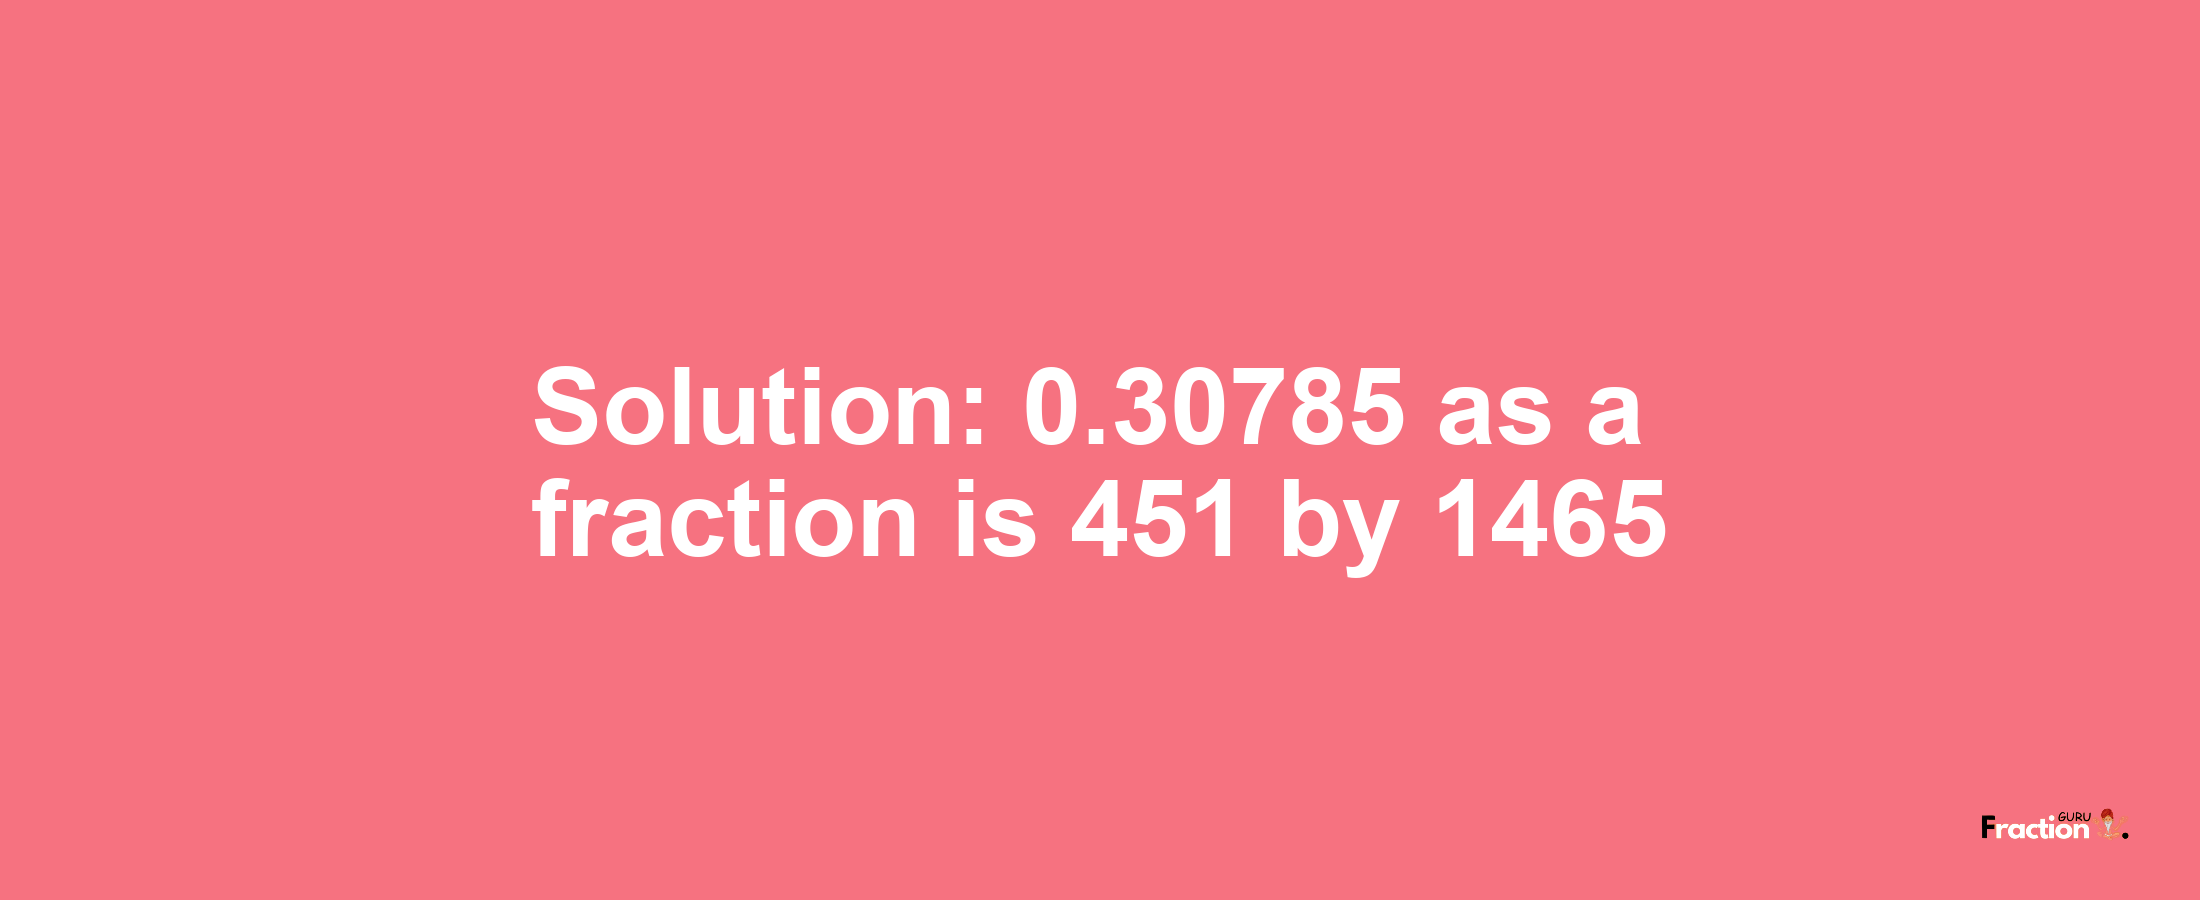 Solution:0.30785 as a fraction is 451/1465